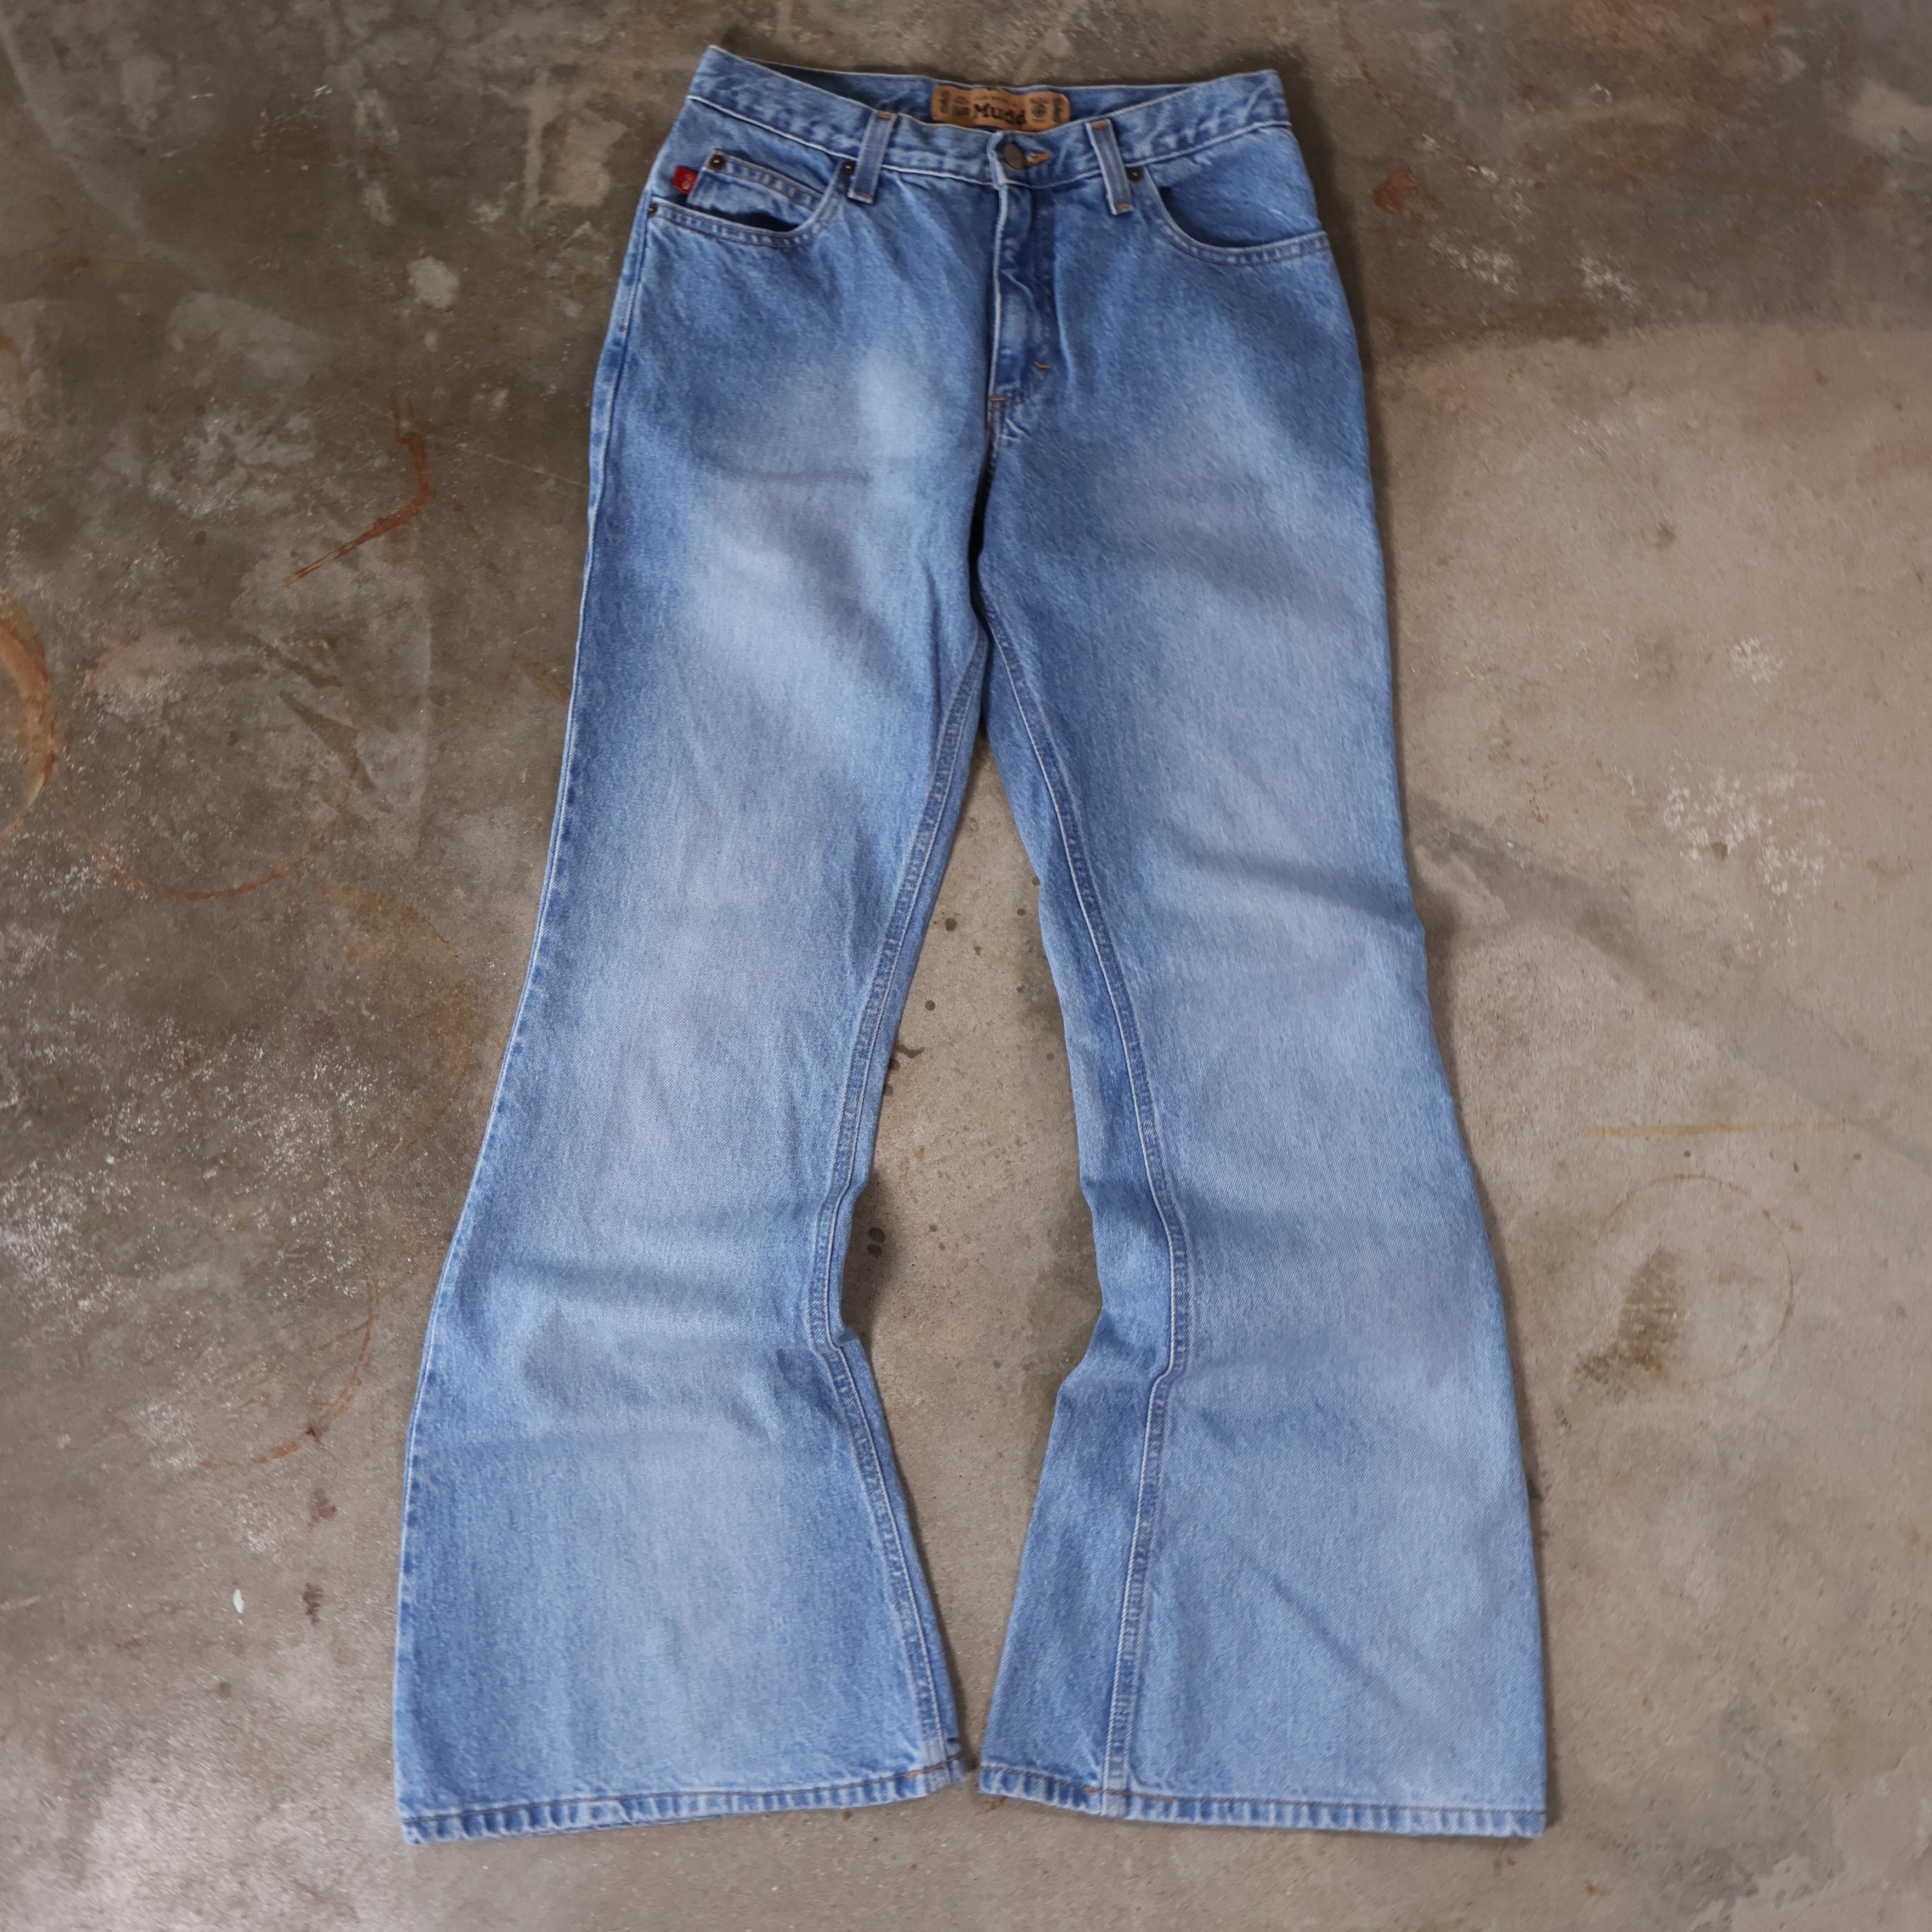 Mudd Flared Jeans 00s (28")